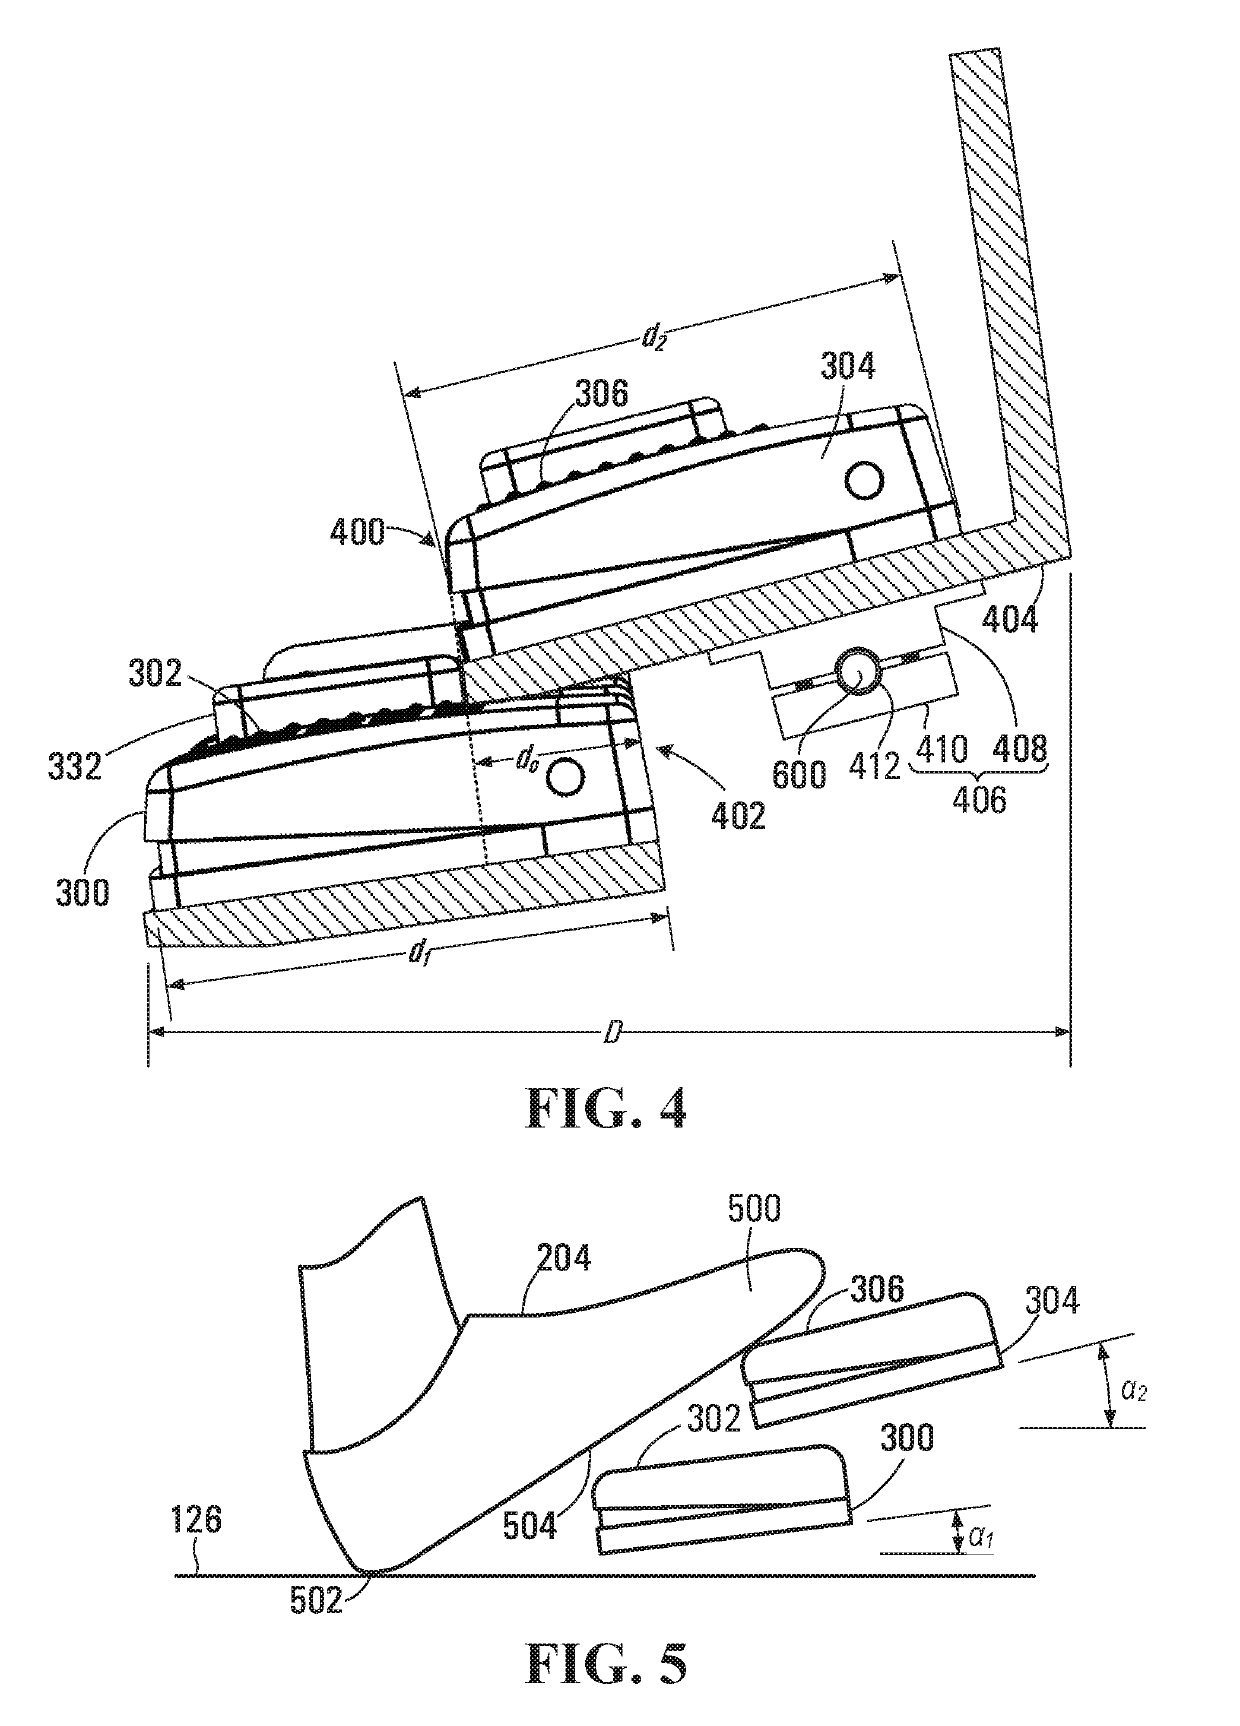 Foot pedal apparatus for use with a workstation controlling a robotic surgery system